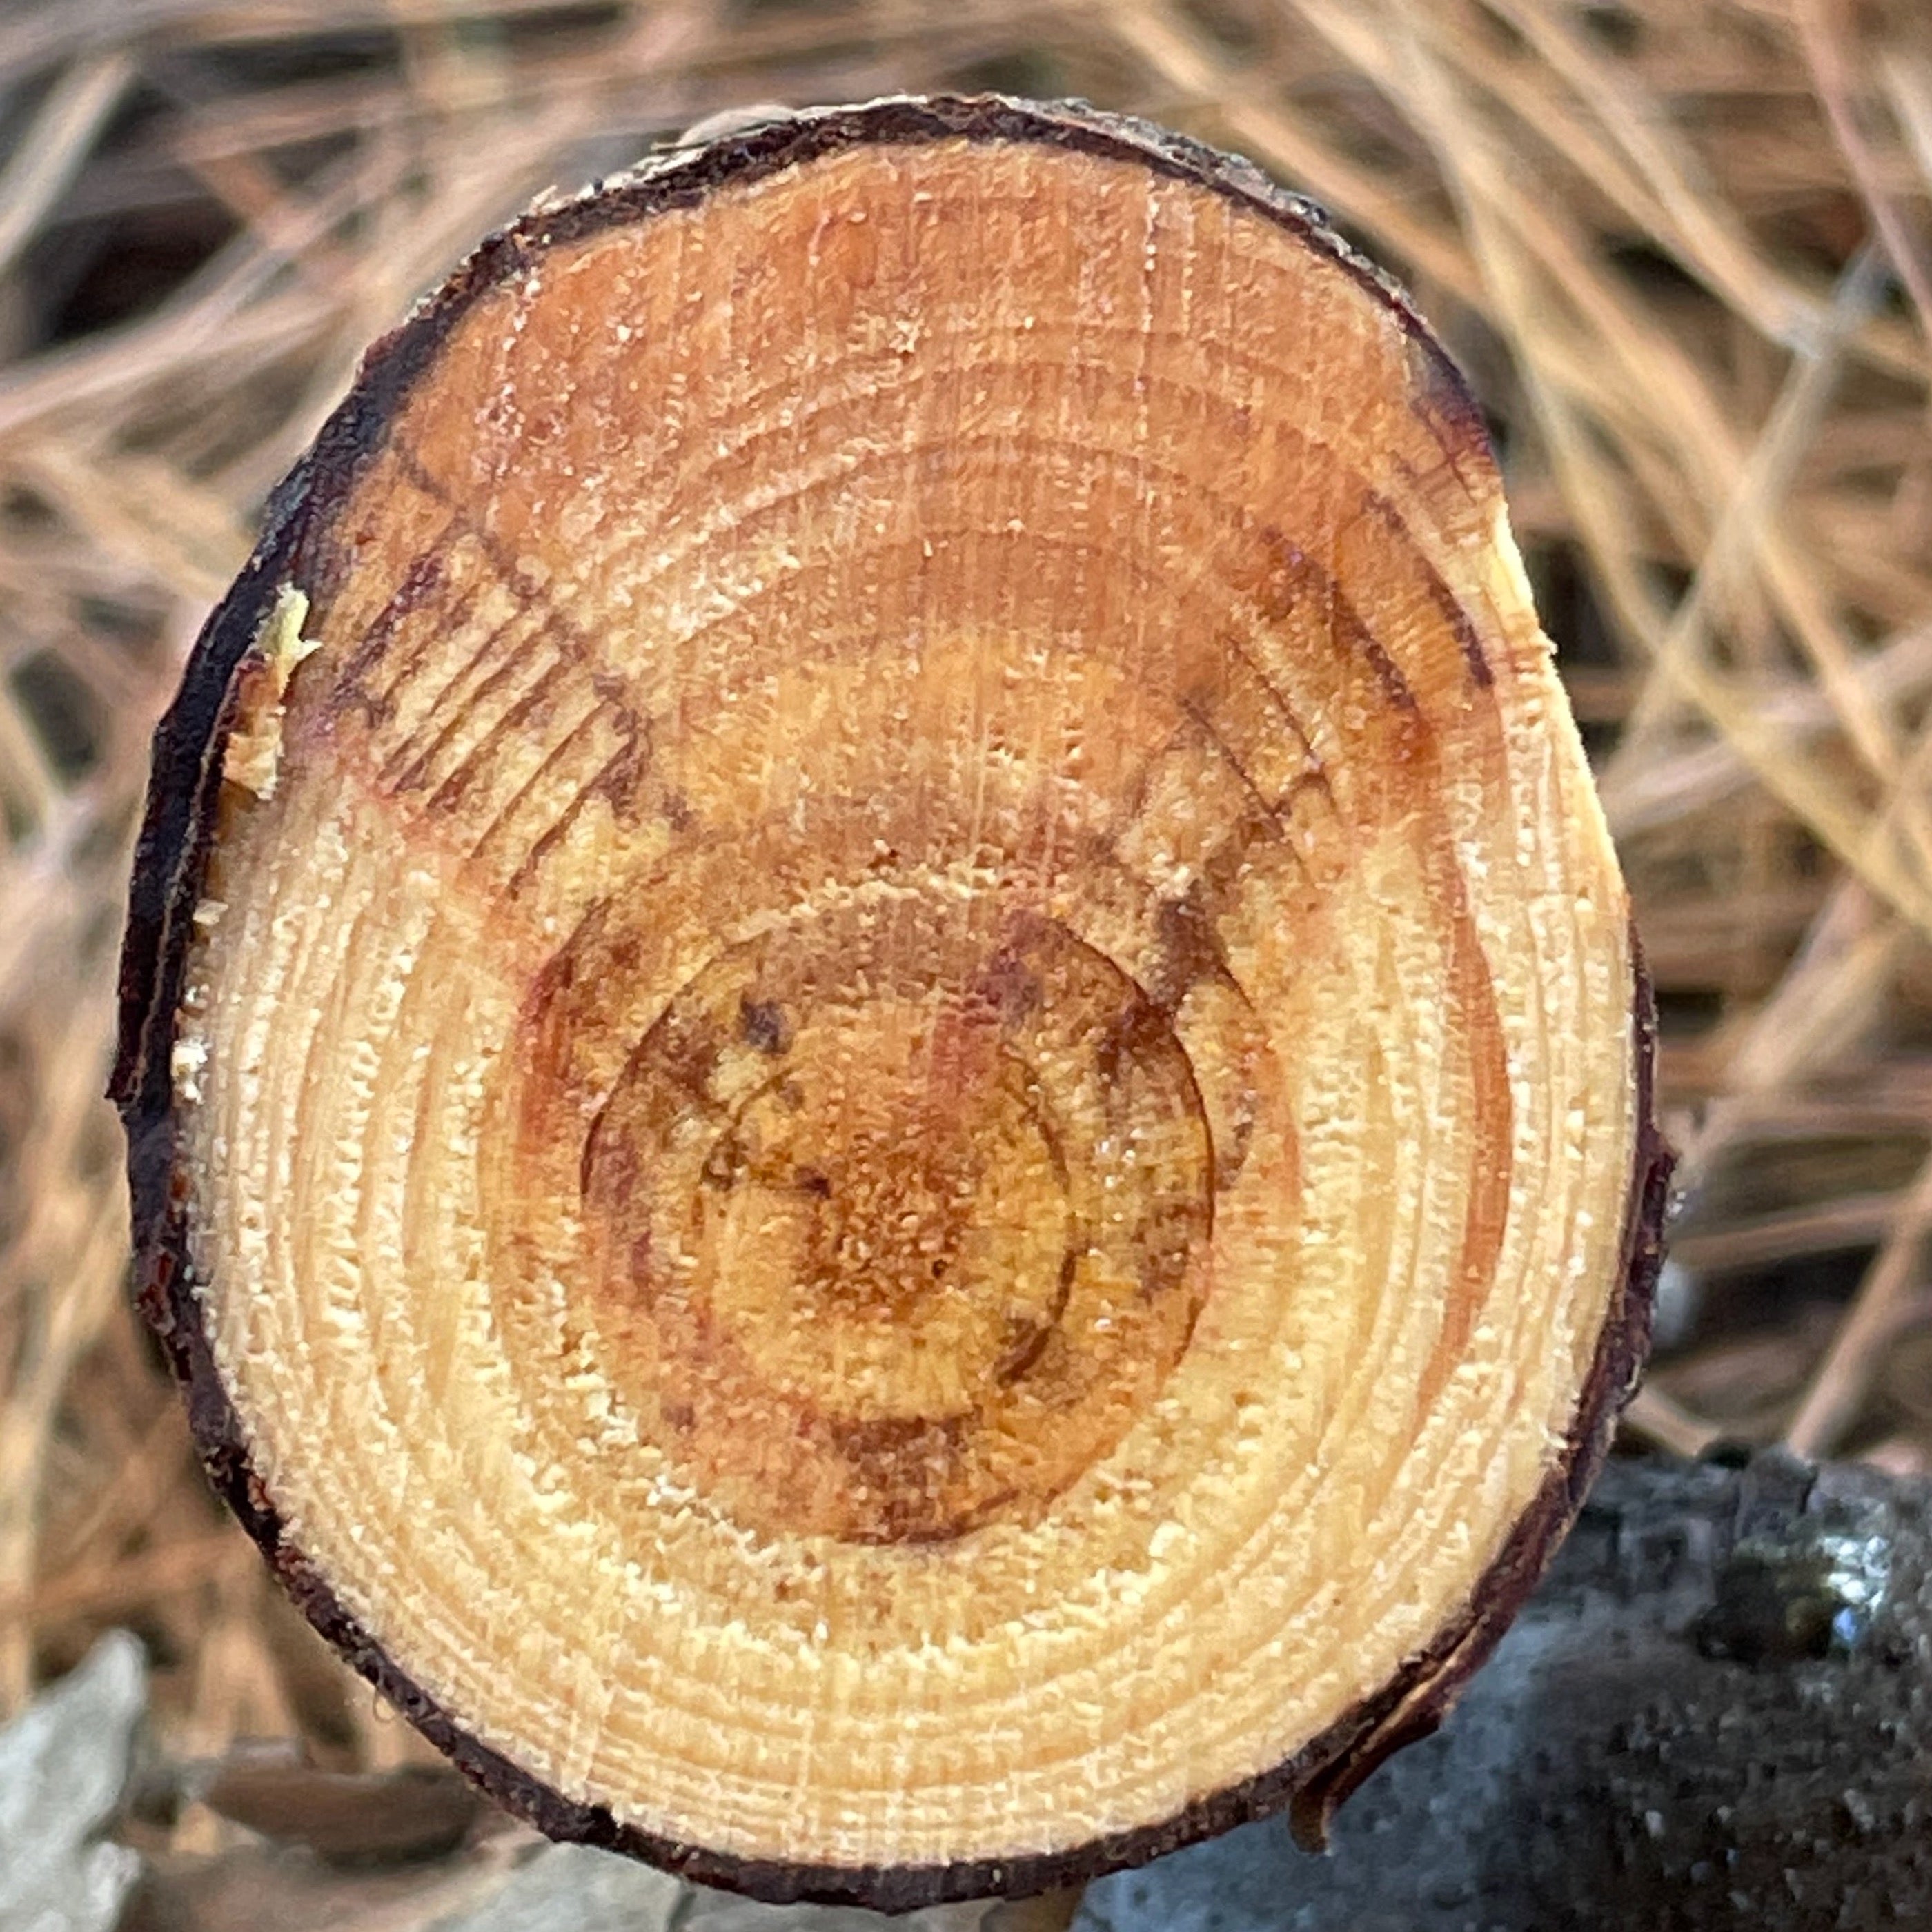 cross section of tree infected with pine ghost canker showing fungal spores